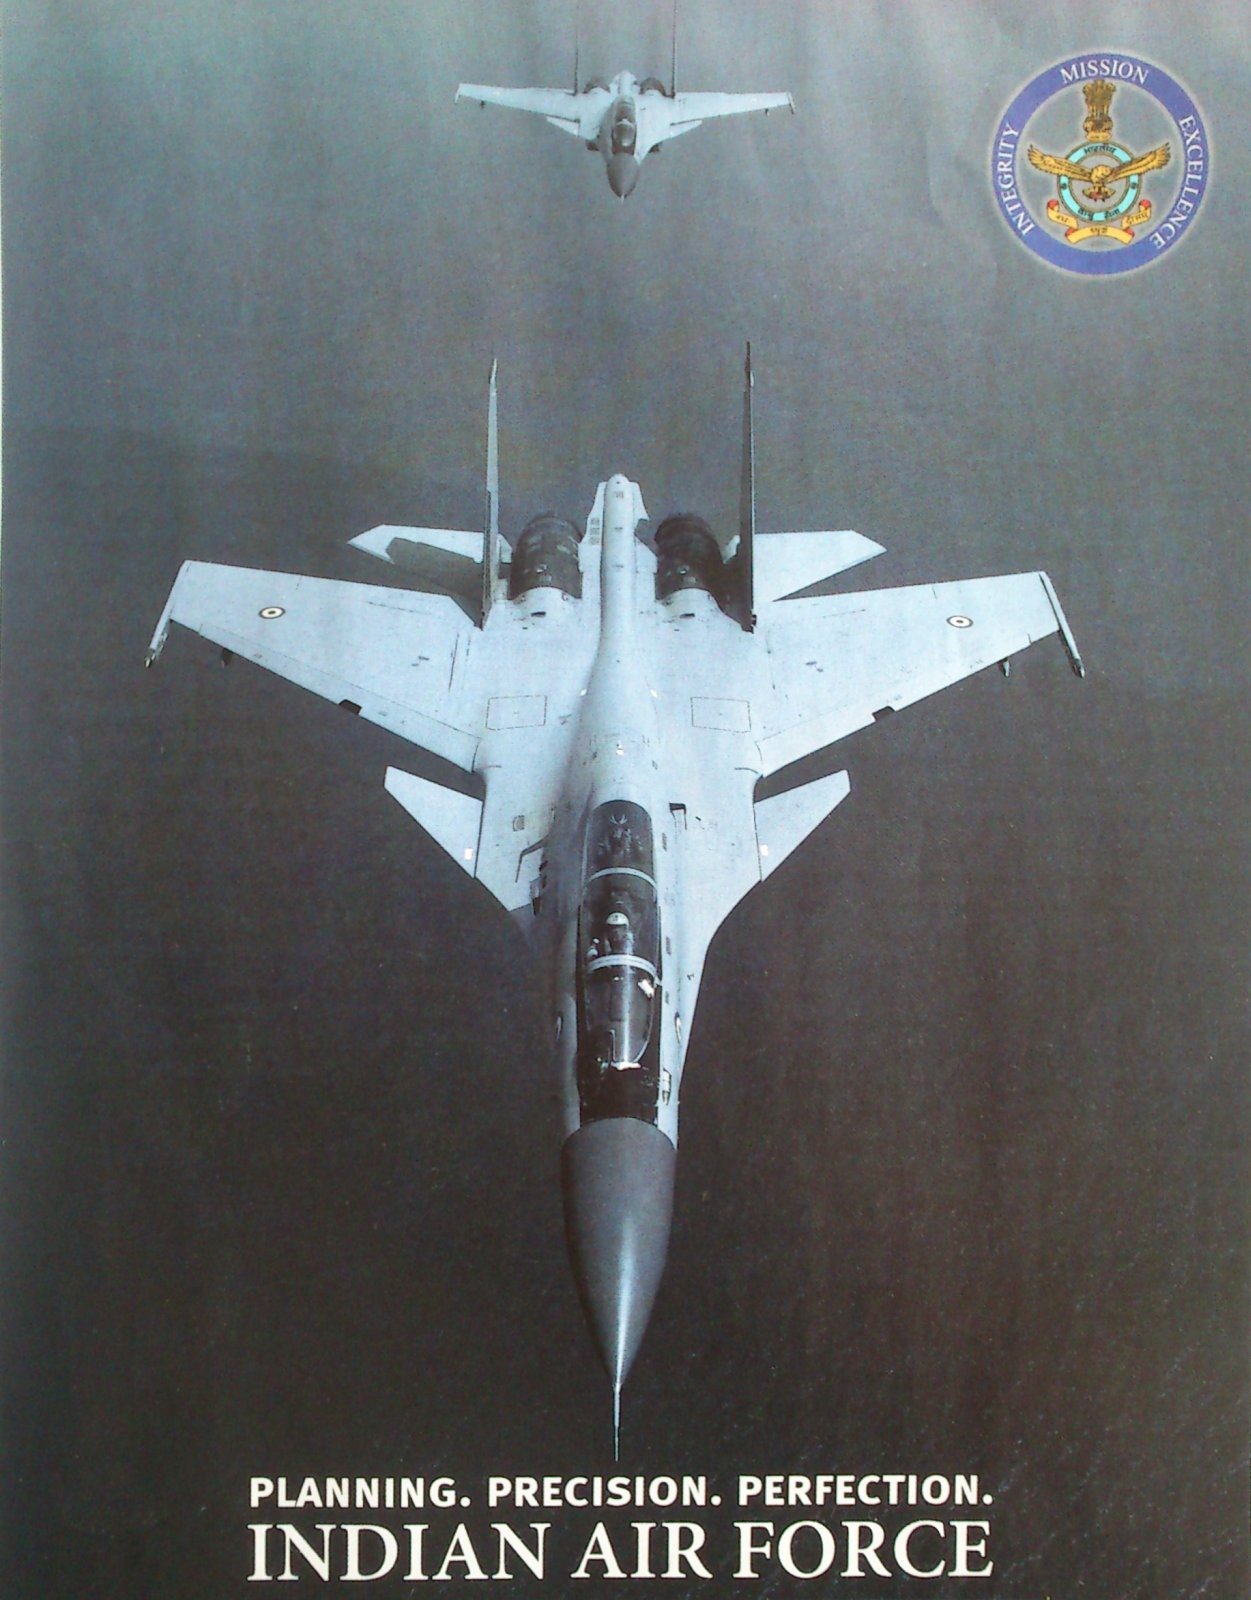 [India-Air-Force-Recruitment-Poster-S.jpg]